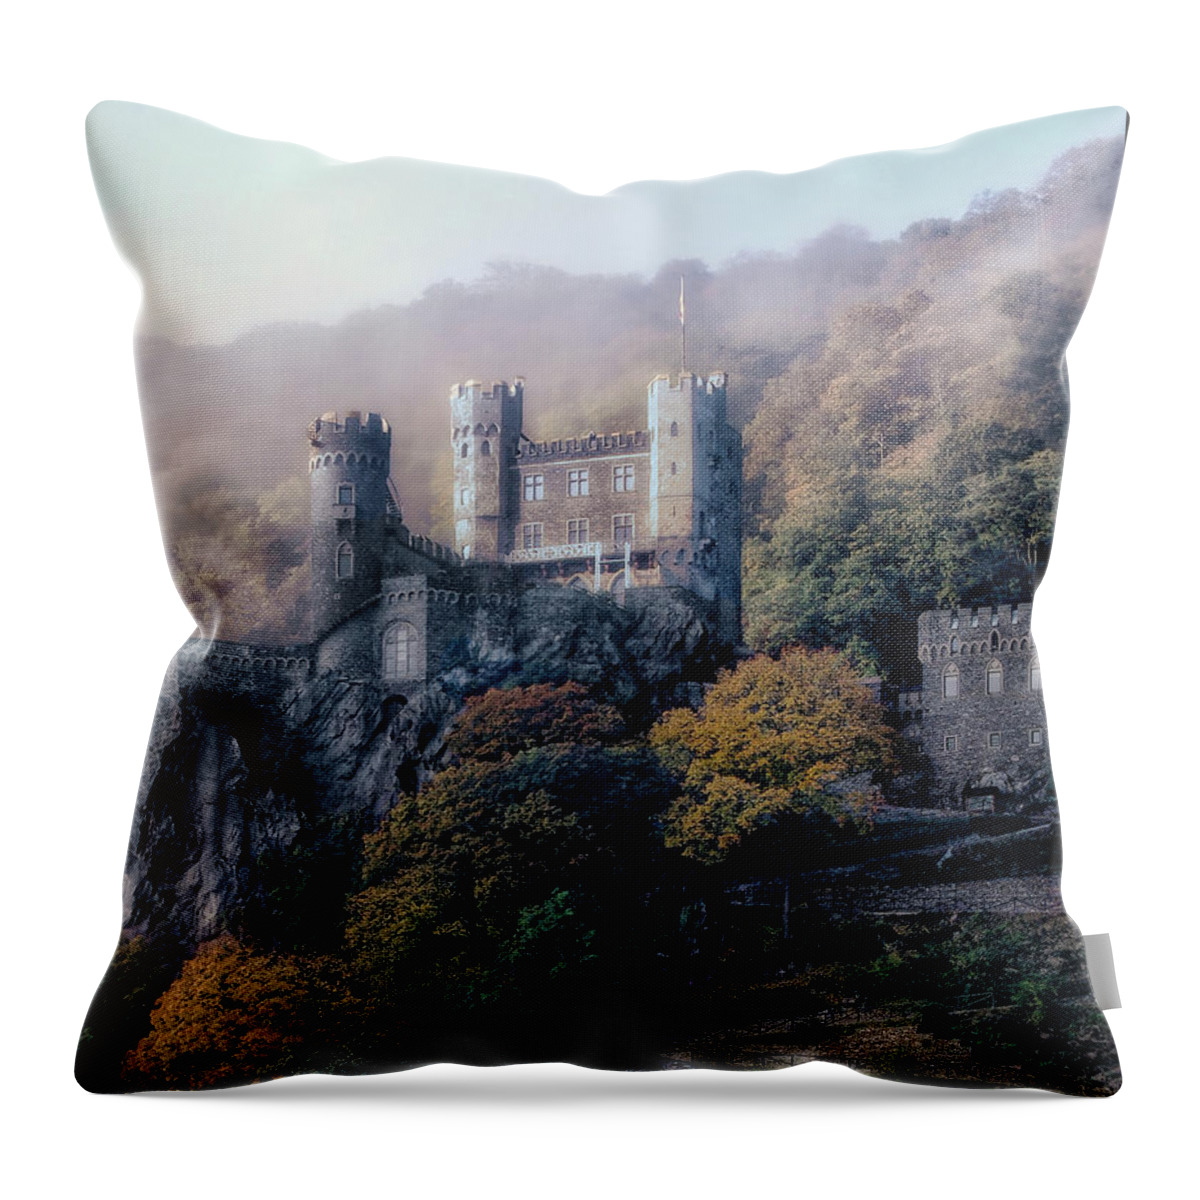 Castle Throw Pillow featuring the photograph Castle In The Mist by Jim Hill